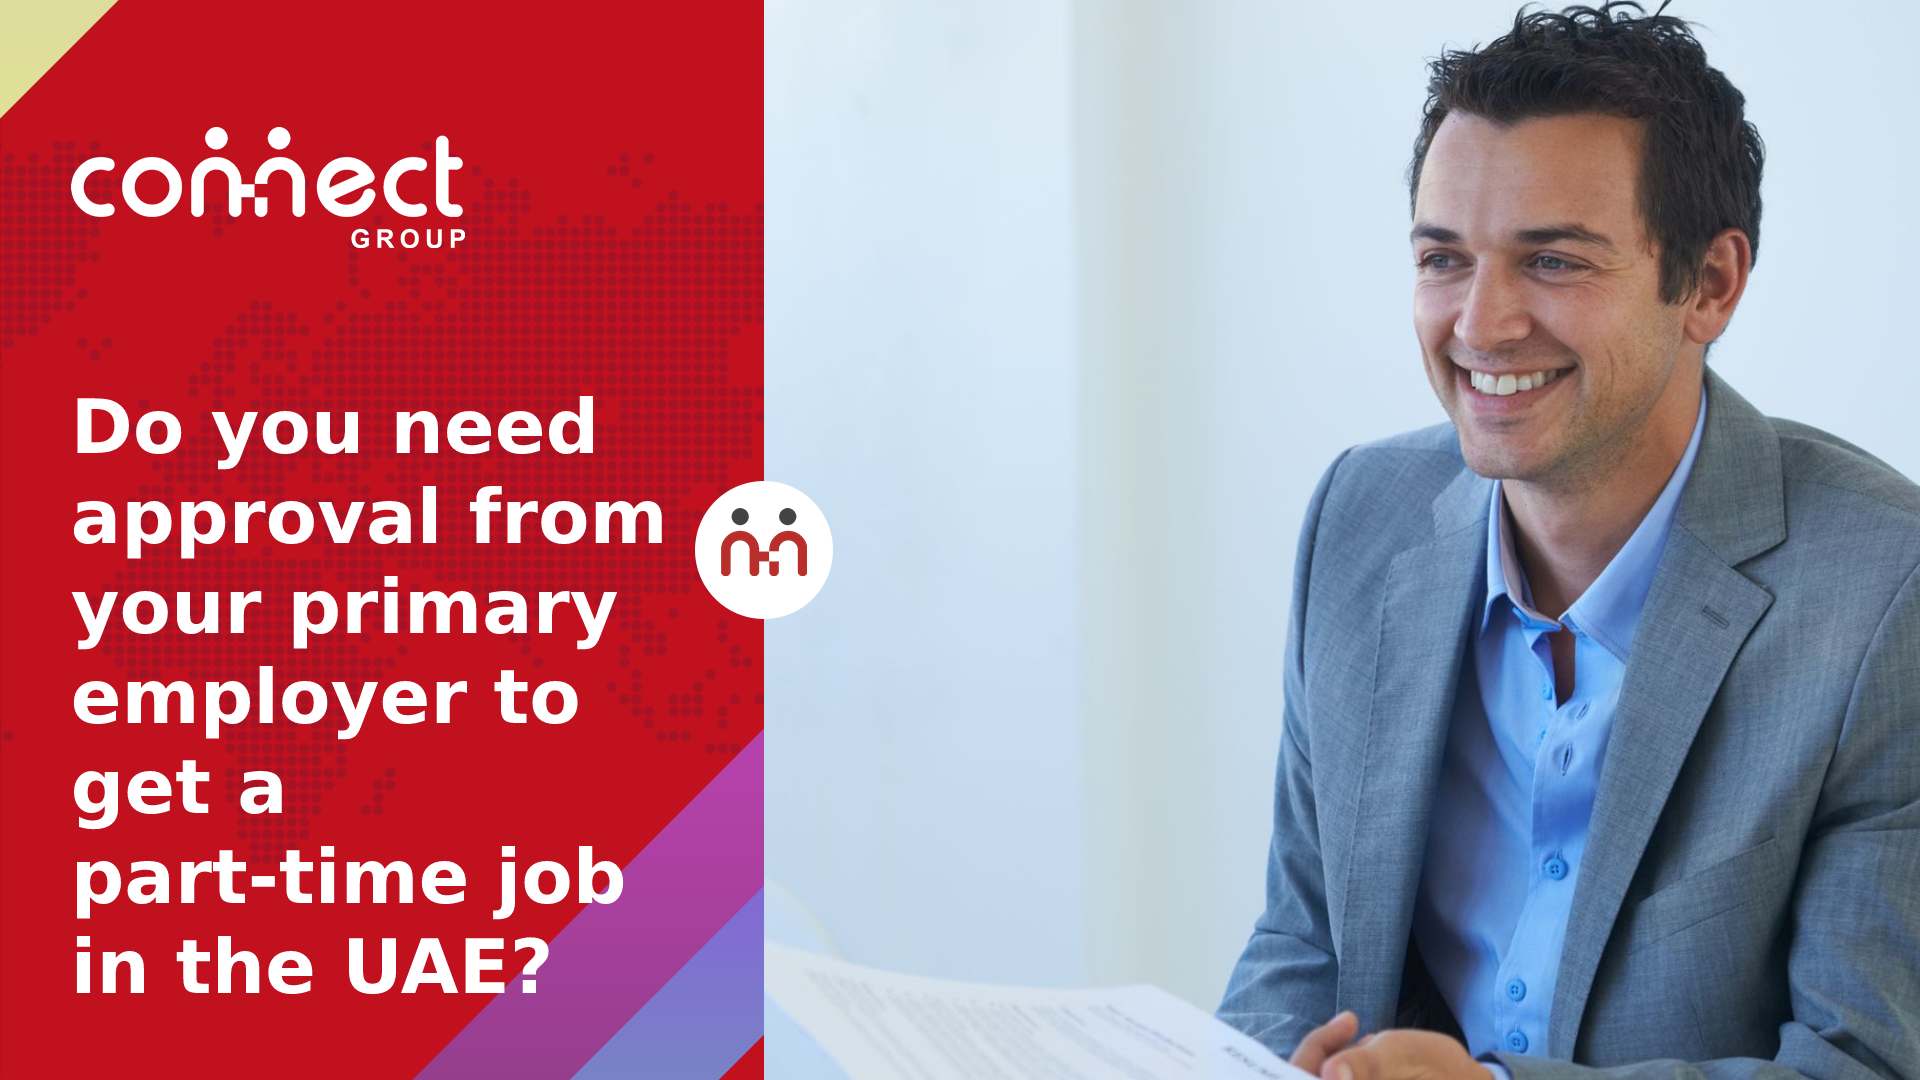 Do you need approval from your primary employer to get a part-time job in the UAE?